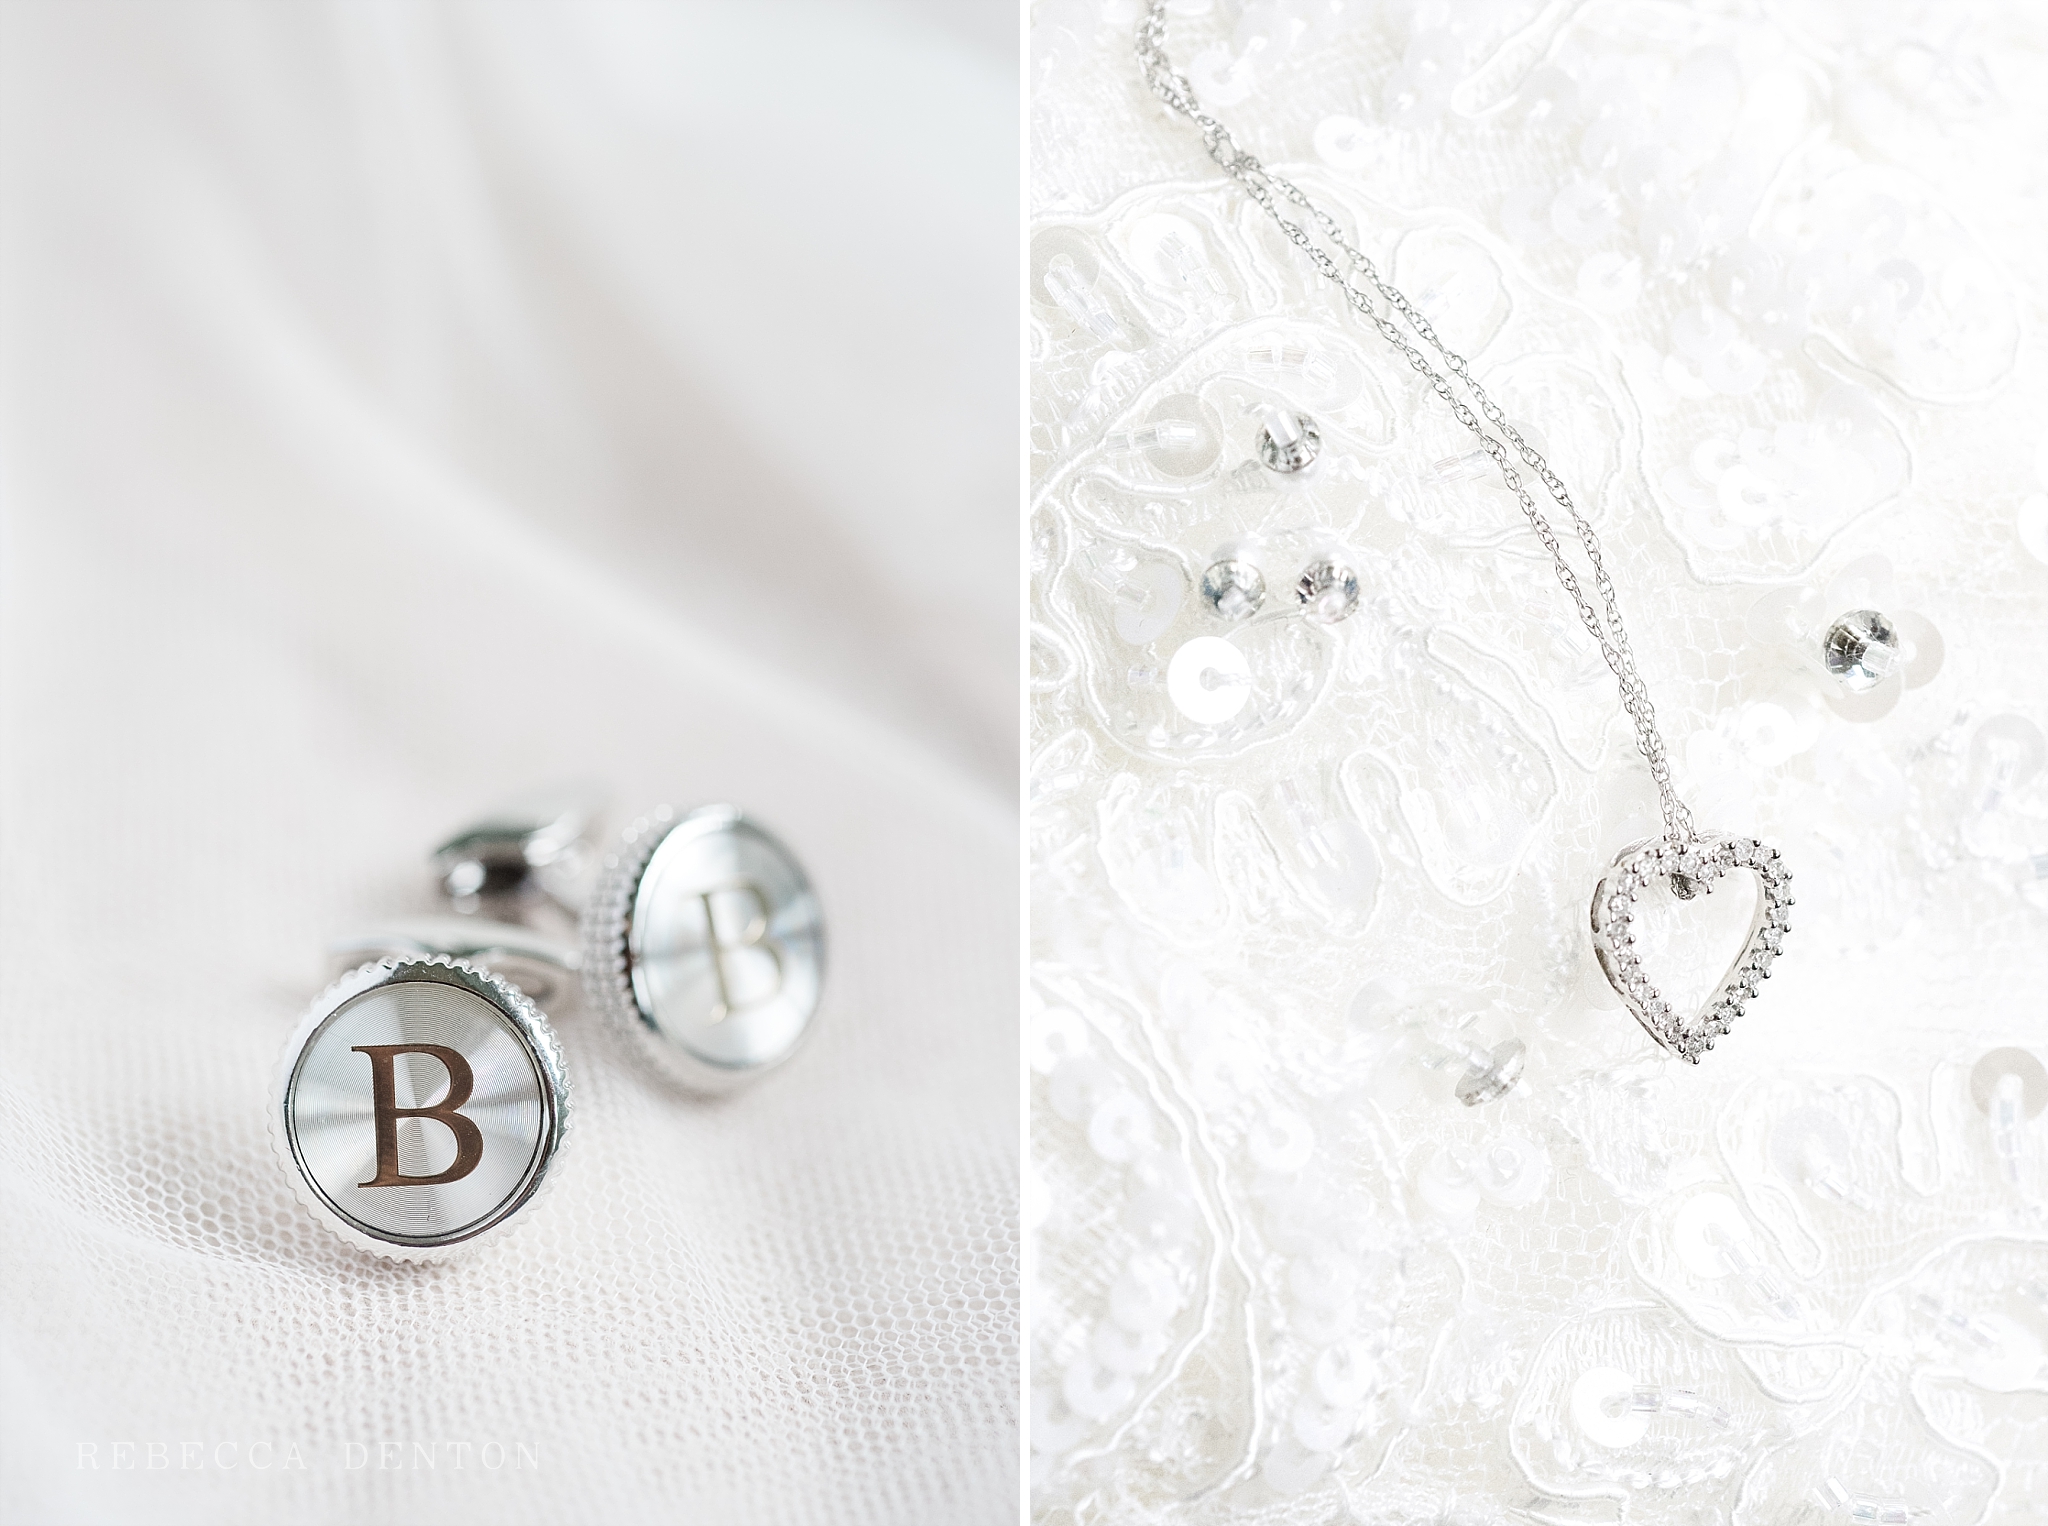 cuff links and heart necklace